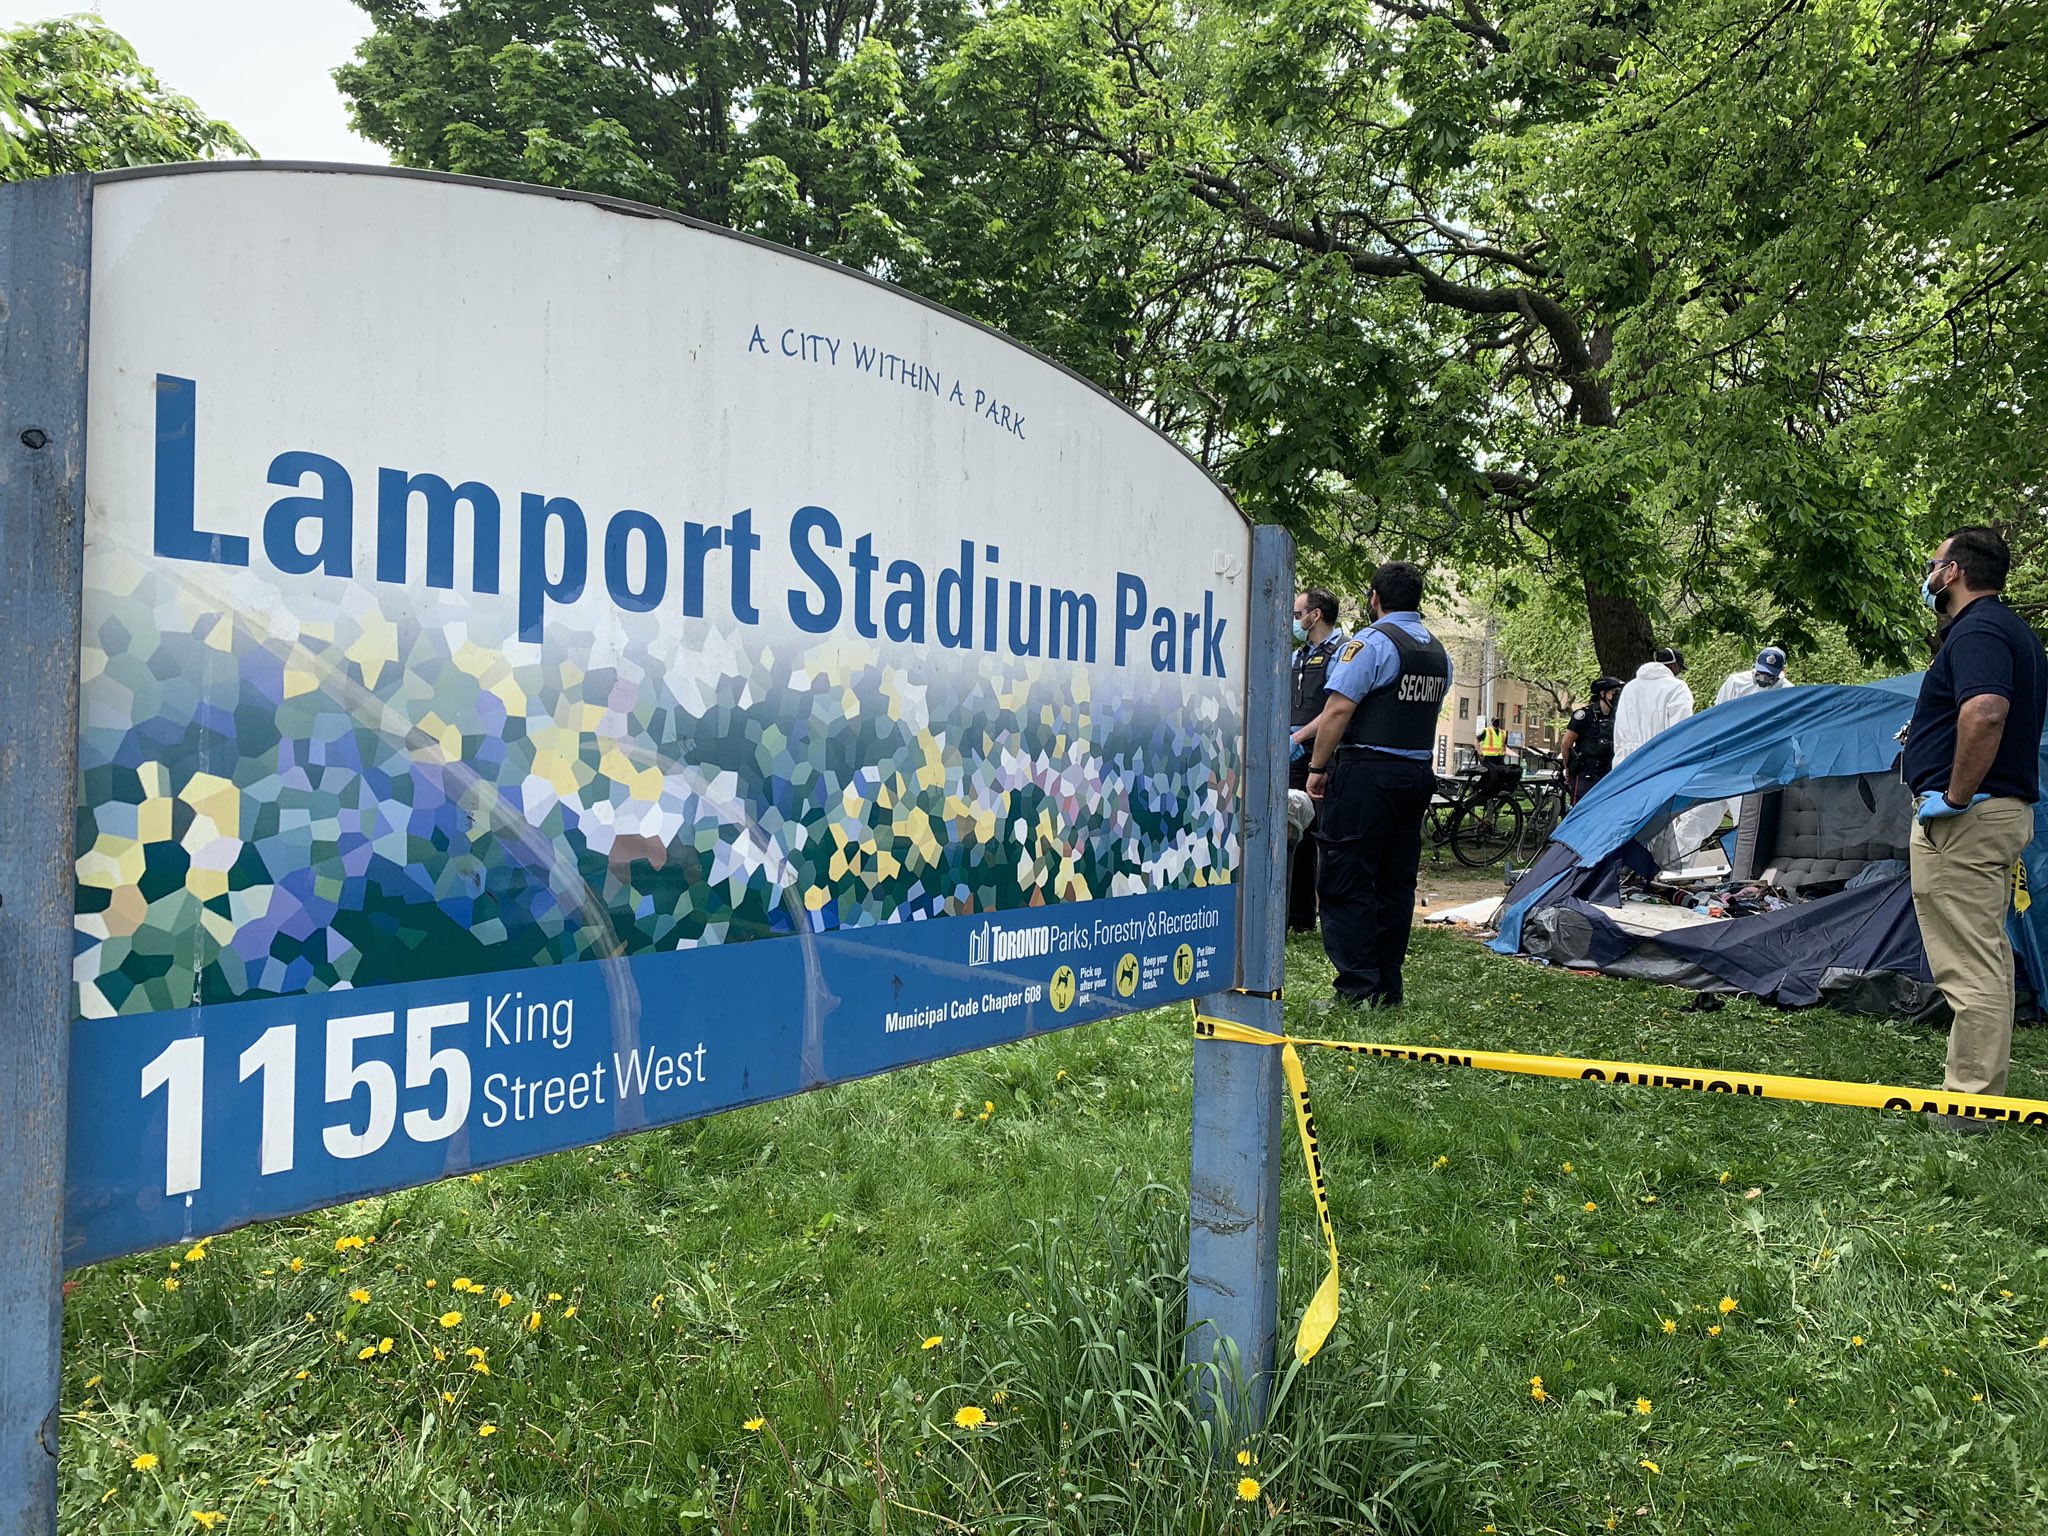 Katherine Ward On Twitter Police At Lamport Stadium Park Where Several People Experiencing Homelessness Live Cityoftoronto Confirmed Enforcement Of The Trespass Notice Is Happening At This Encampment This Week Https T Co Hphb4yp6oe